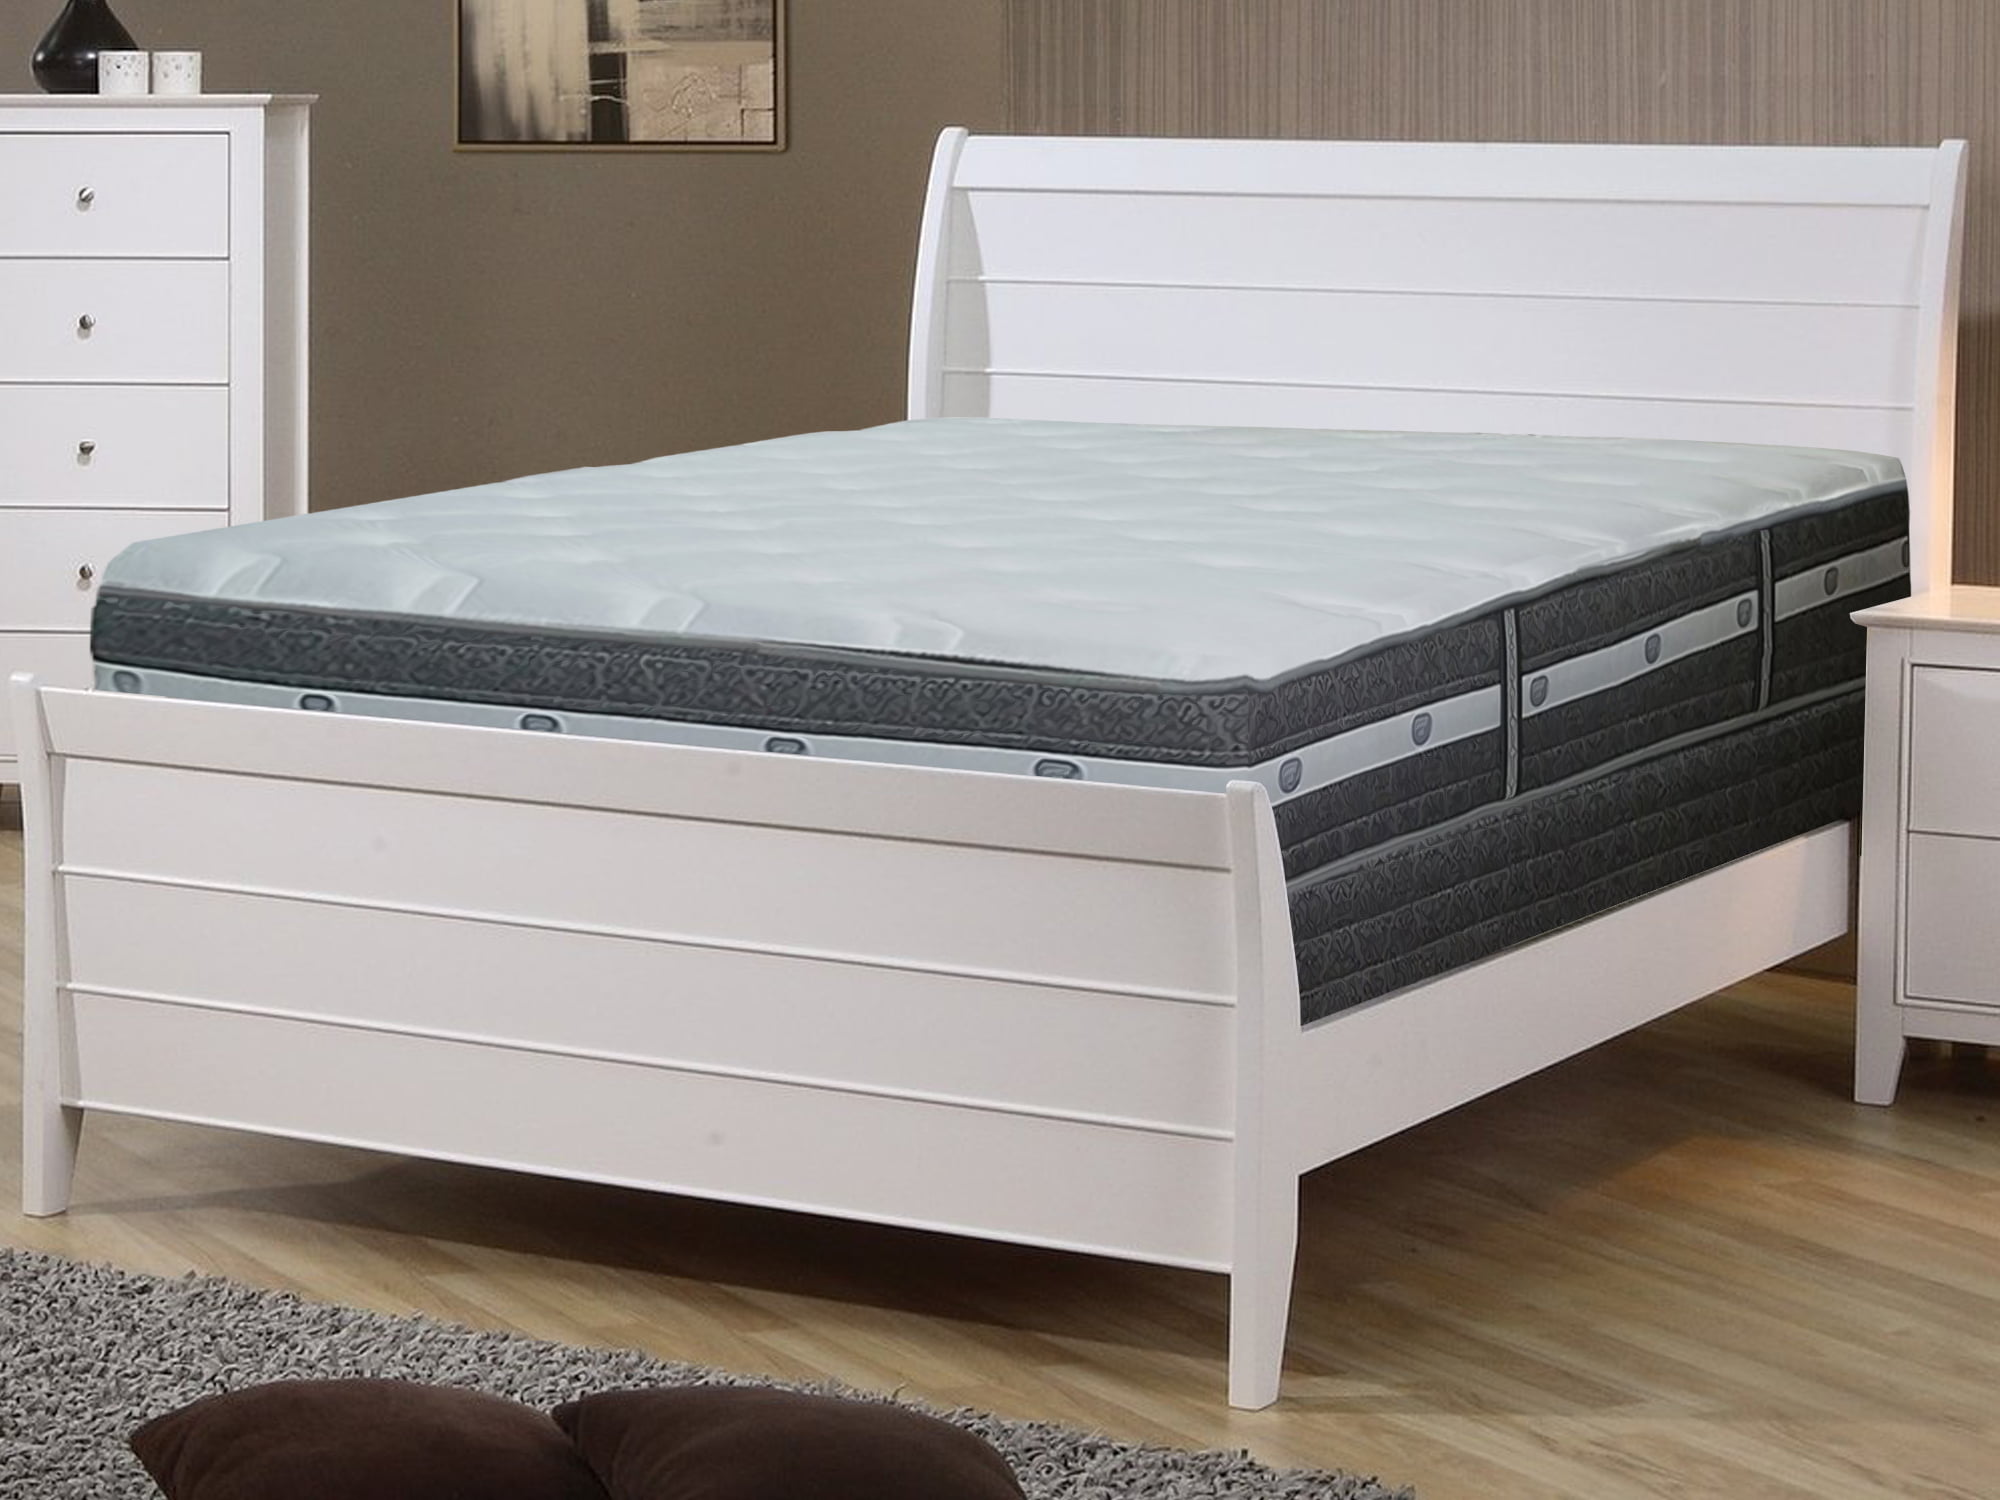 sealy royale queen size innerspring mattress